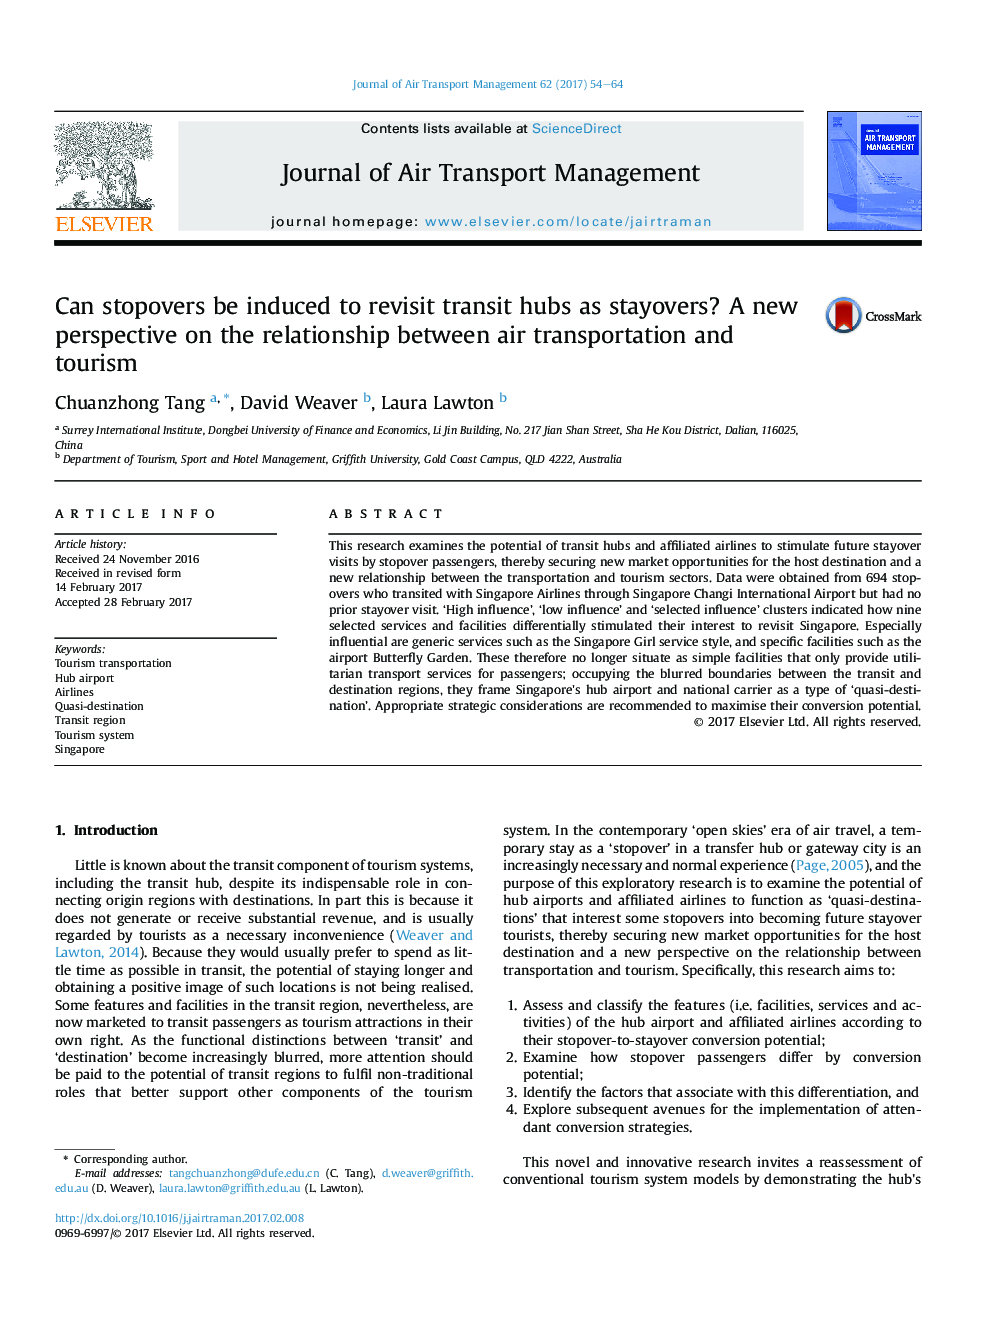 Can stopovers be induced to revisit transit hubs as stayovers? A new perspective on the relationship between air transportation and tourism